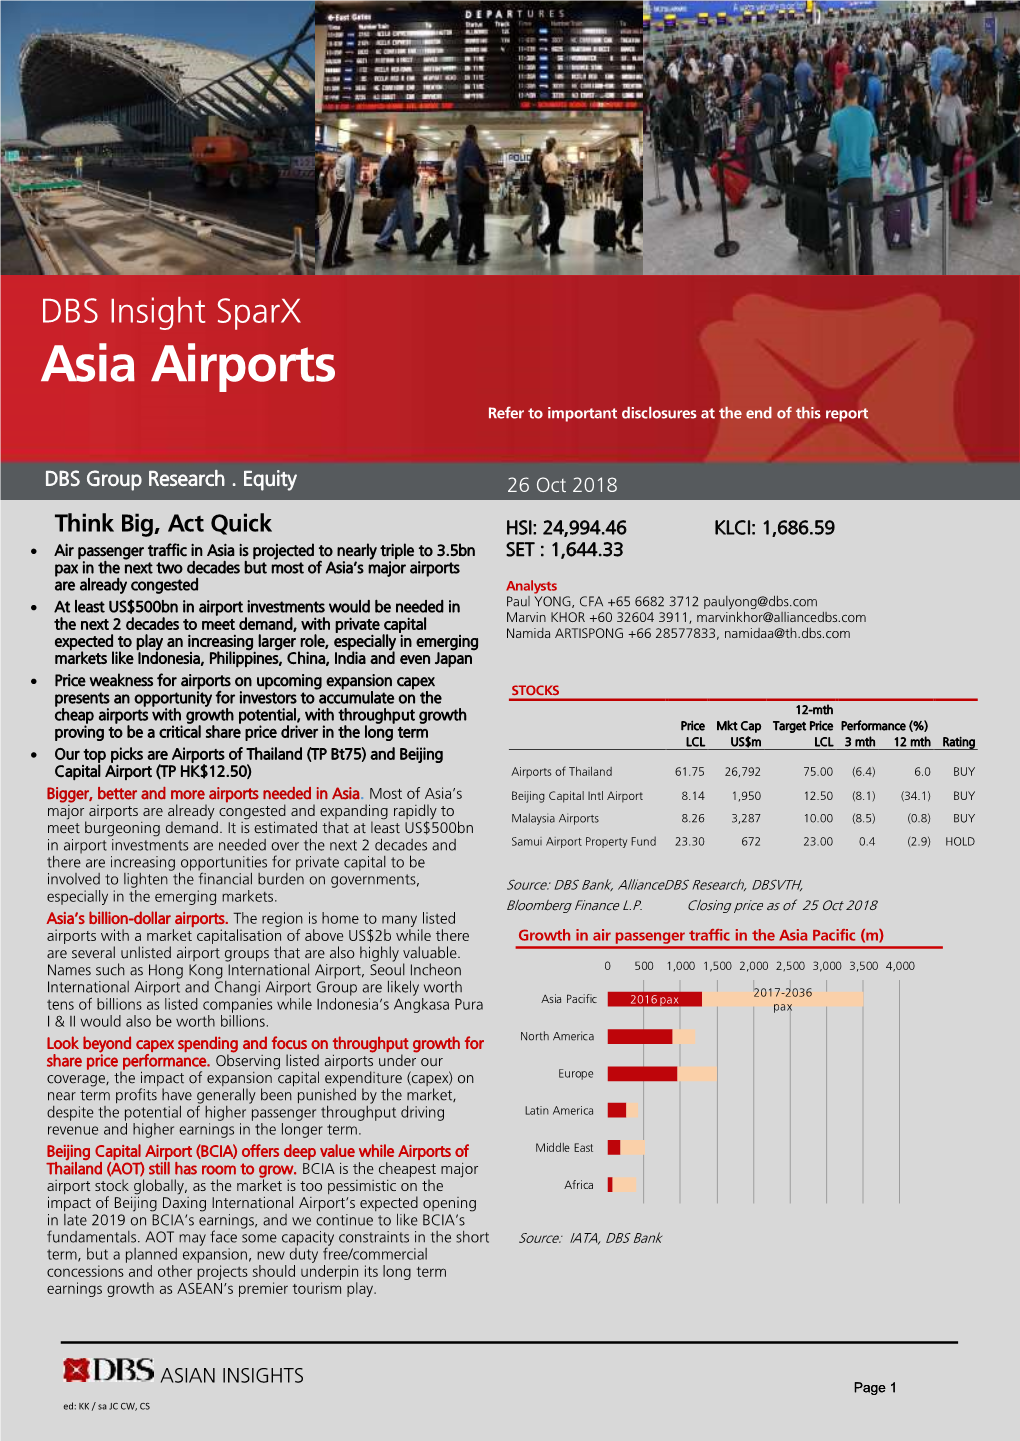 Asia Airports Refer to Important Disclosures at the End of This Report